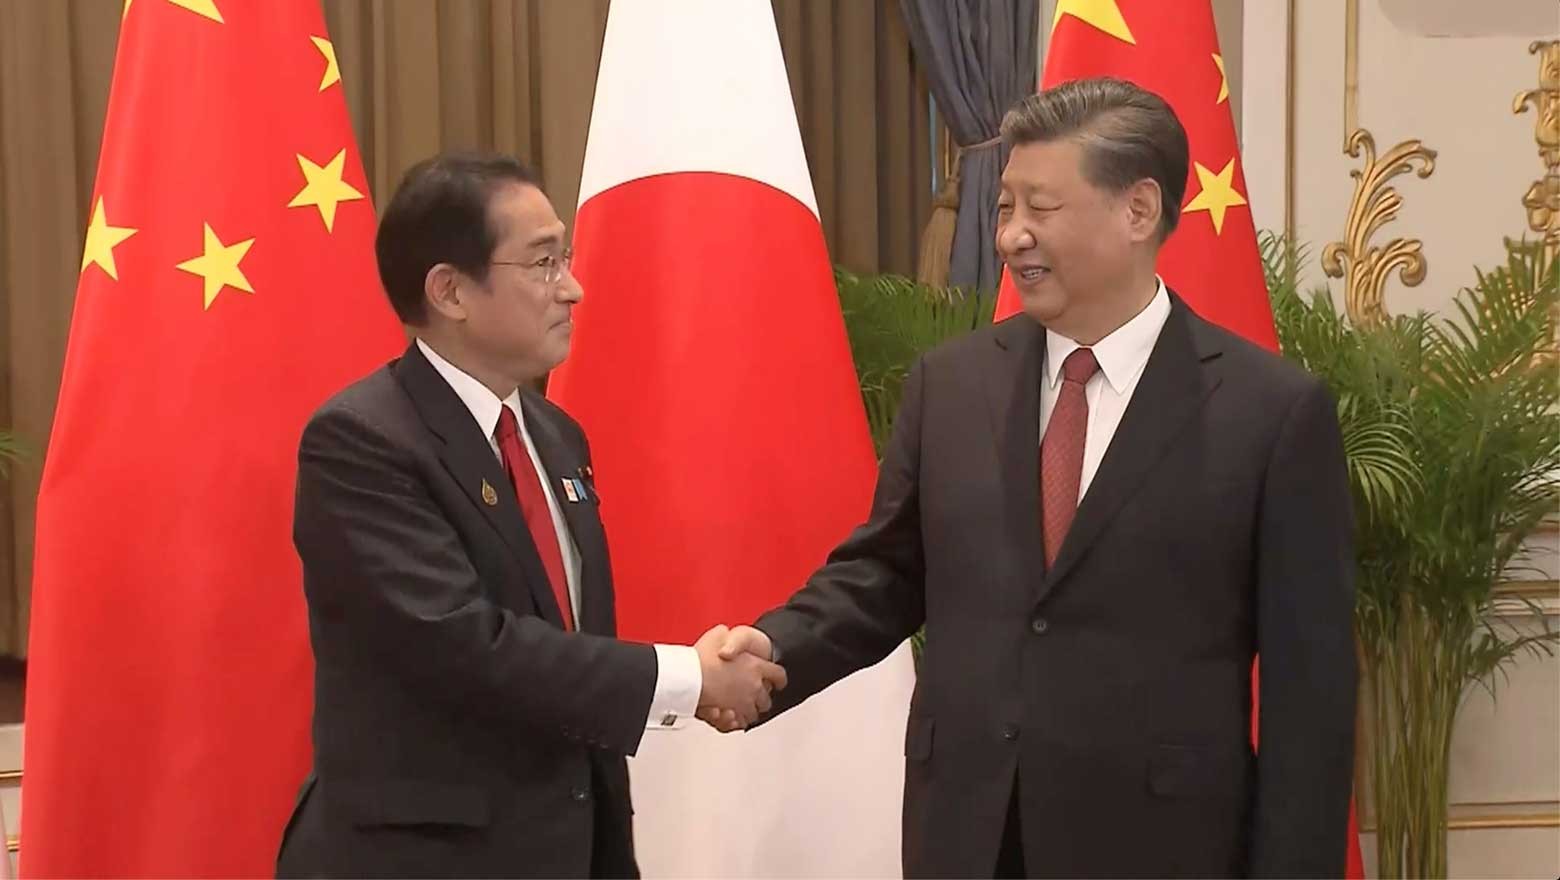 Xi Jinping urges better China-Japan ties, with eye on America